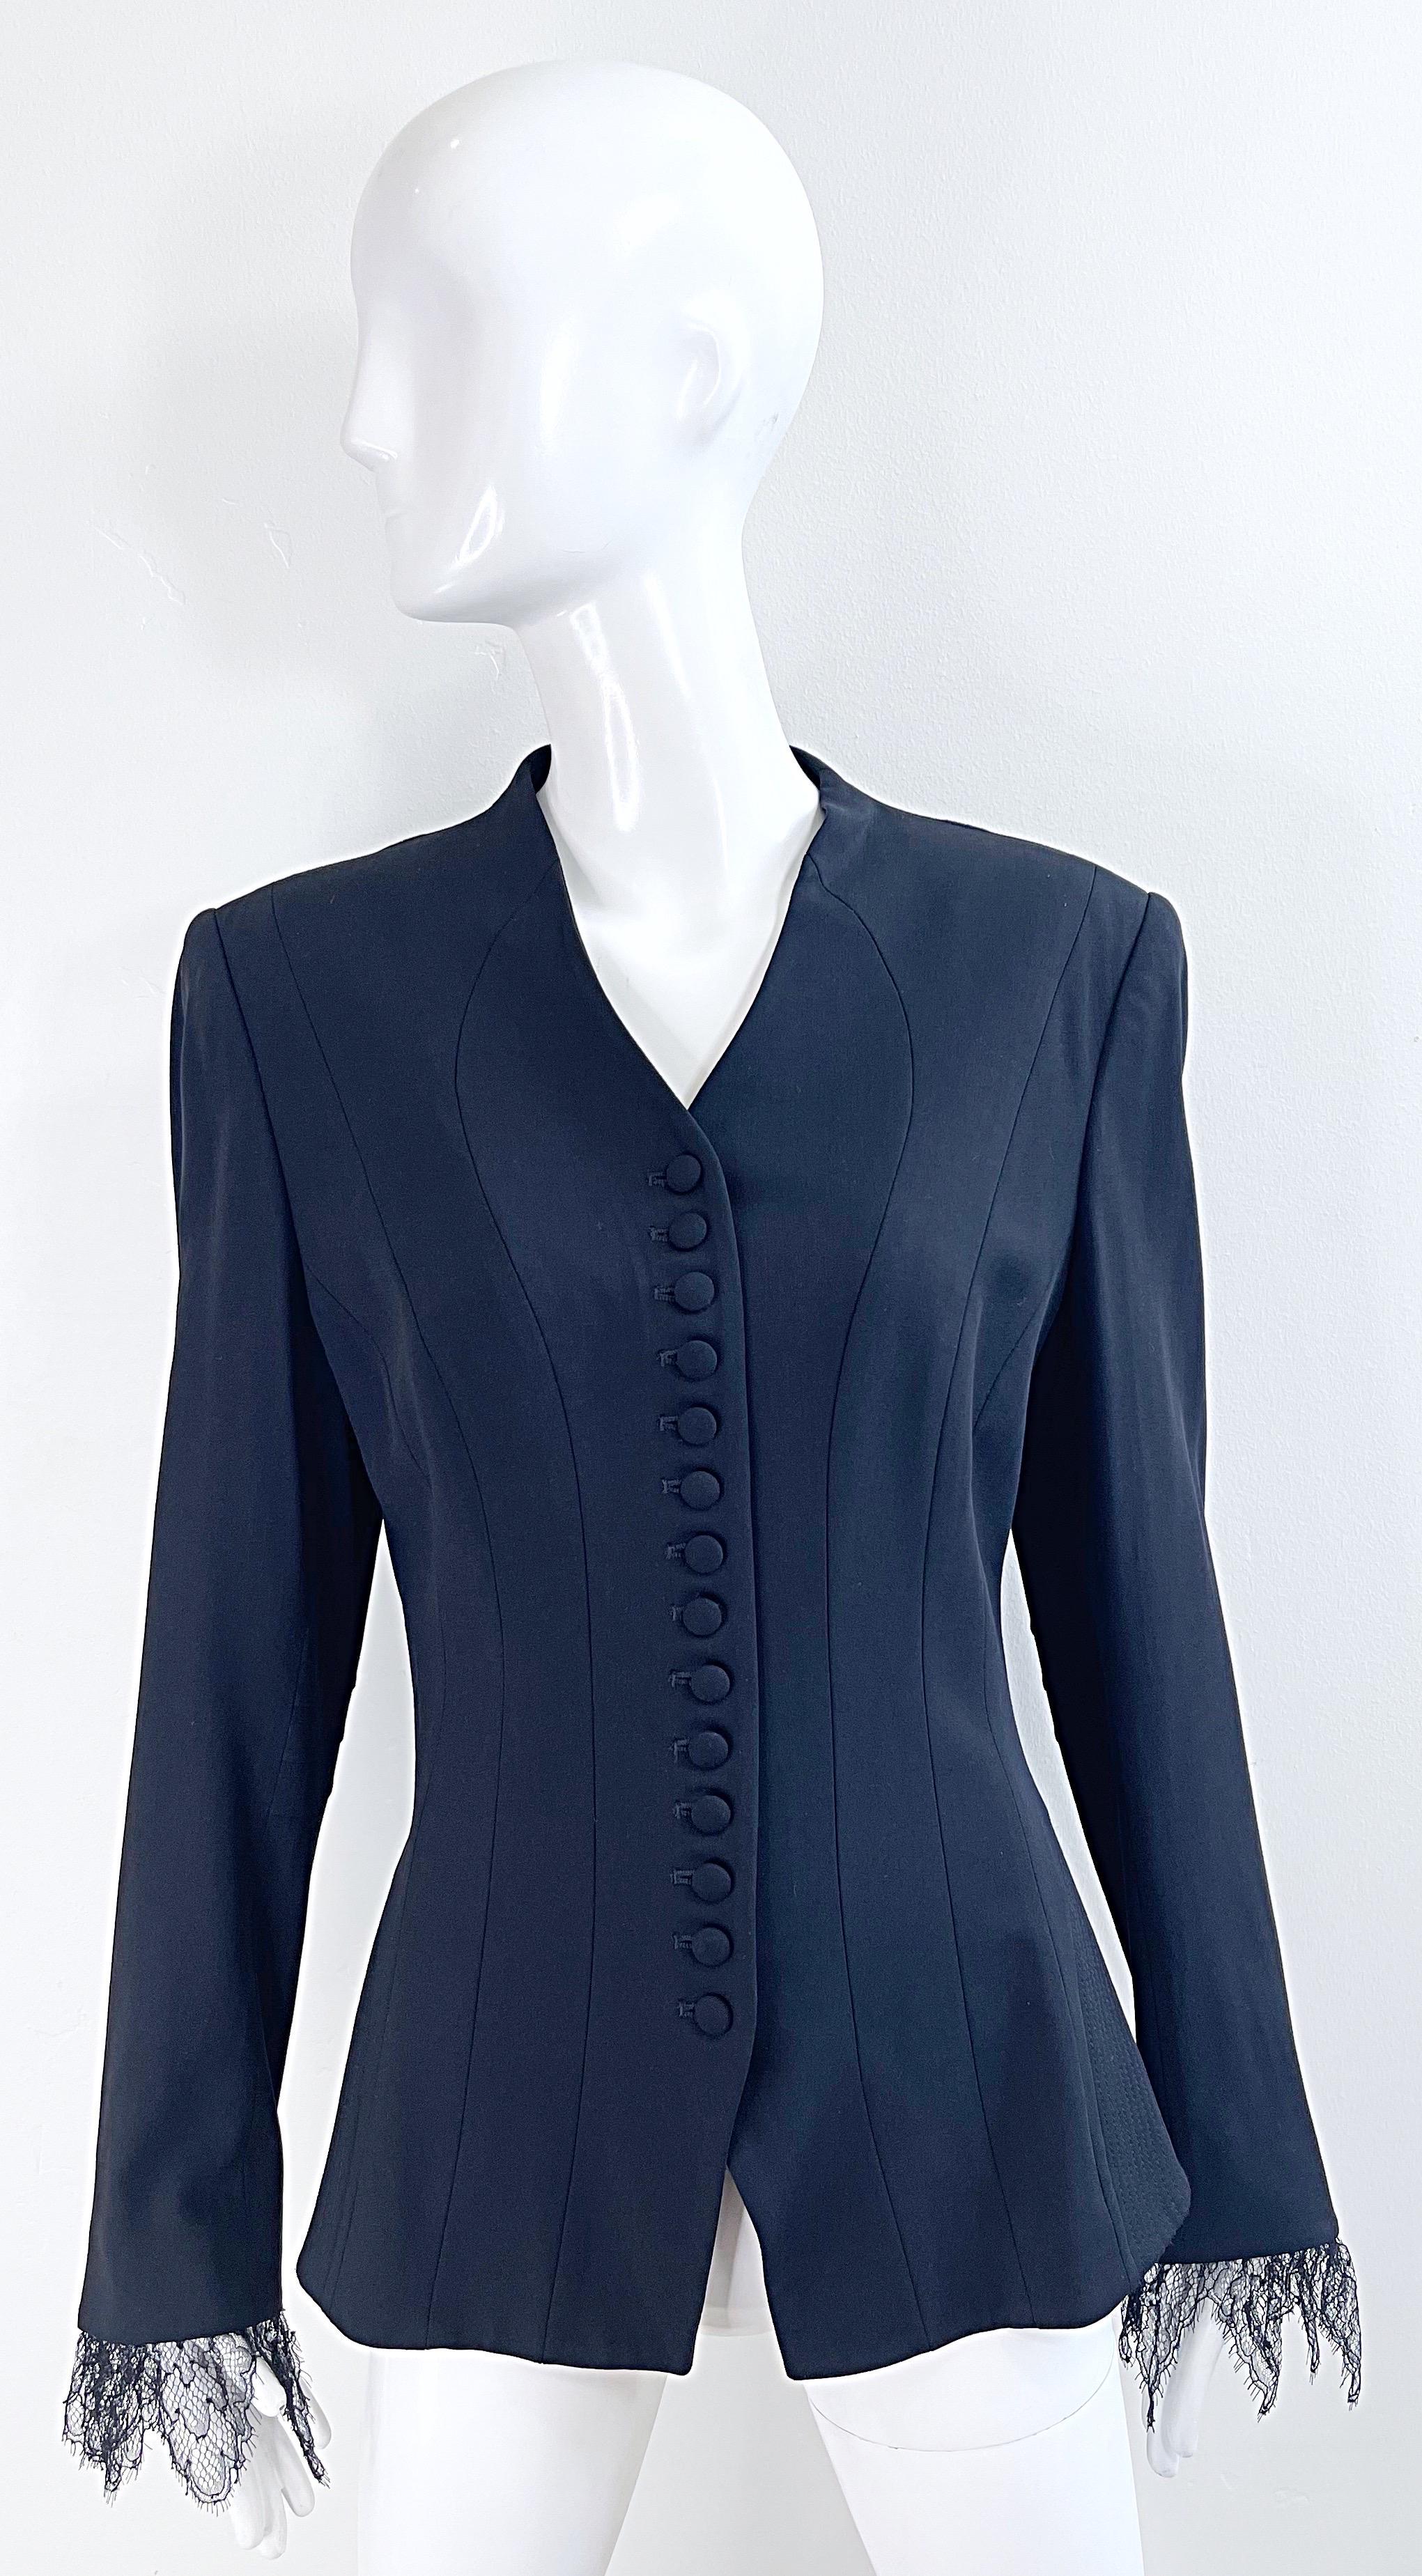 Yigal Azrouel 2000s Size 8 Black Vintage Blazer Jacket w/ Lace Sleeves In Excellent Condition For Sale In San Diego, CA